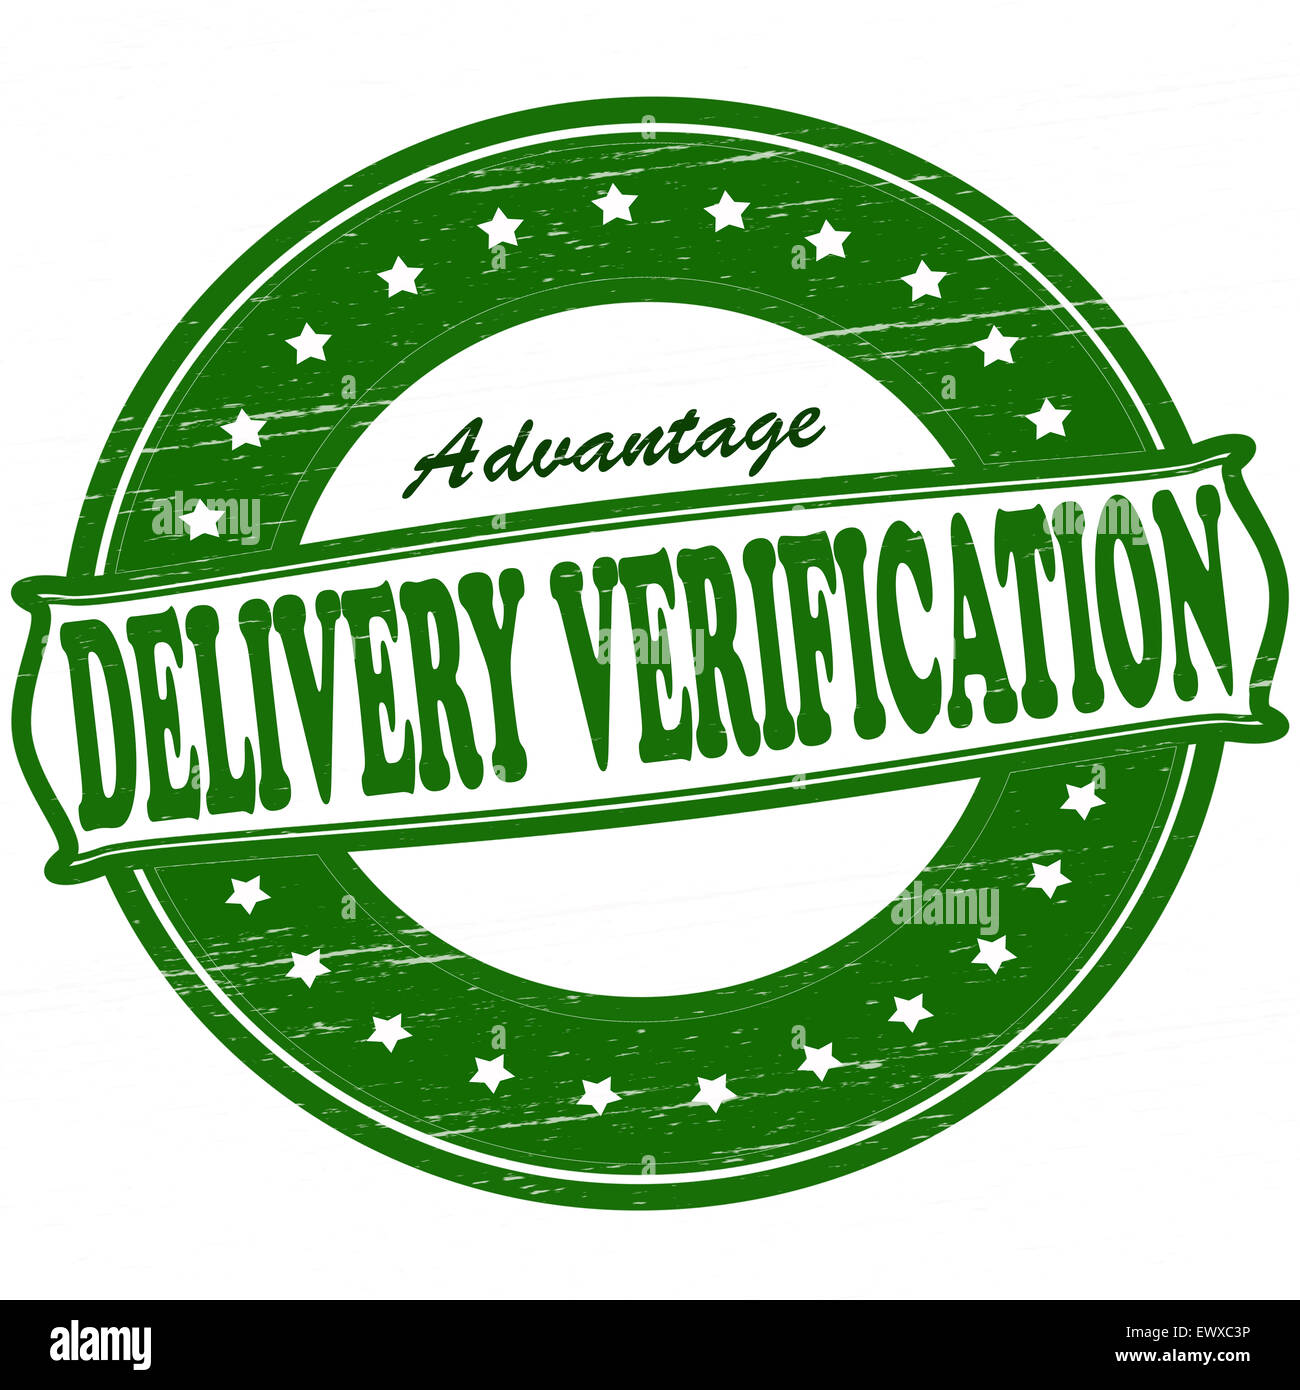 Stamp with text delivery verification inside, illustration Stock Photo